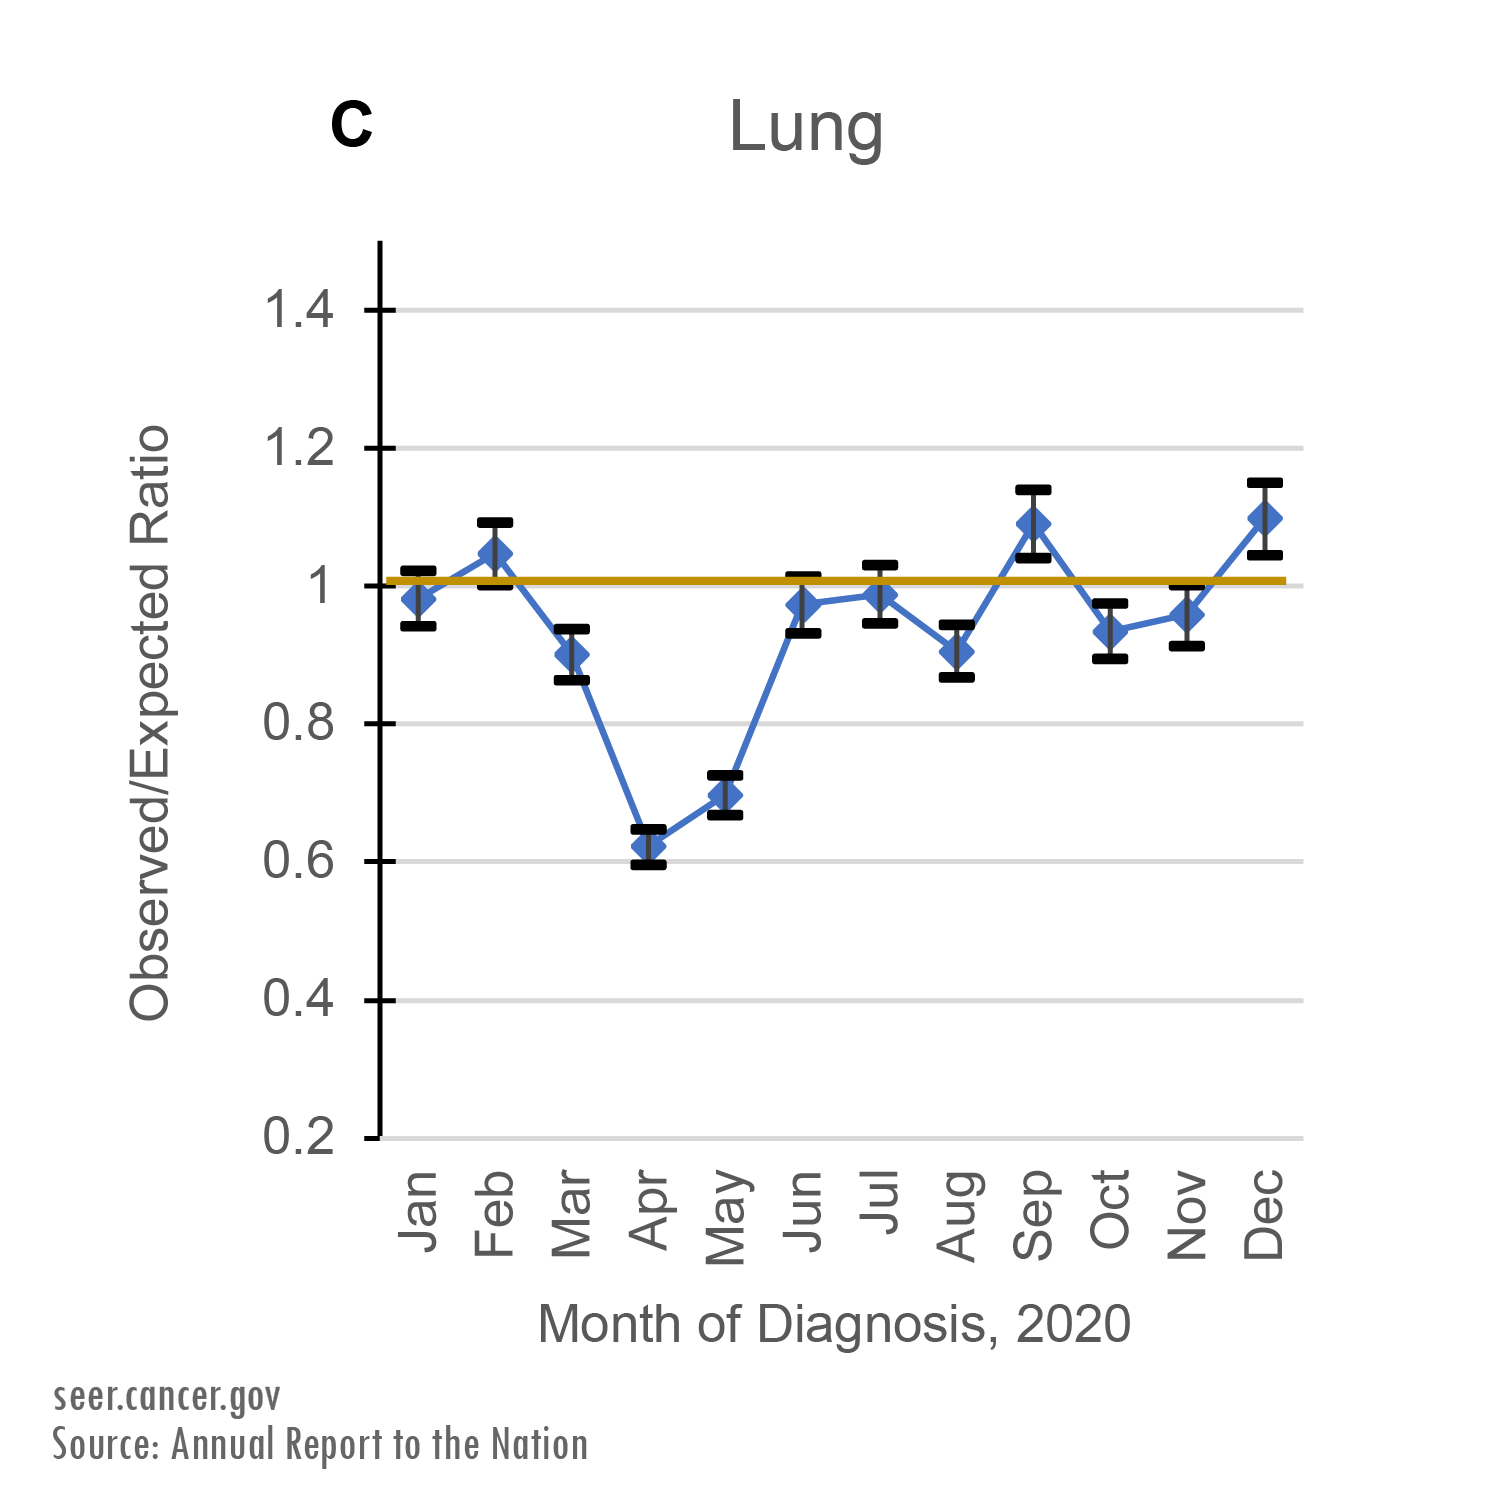 Observed/Expected Ratio of Lung cancer diagnoses by Month of Diagnosis, 2020. Between March and May of 2020, cancer registries recorded far fewer cases than expected. New cases of pancreatic cancer fell by about 20% in April 2020. While the rate of new cancer diagnoses hovered around predicted levels in the second half of 2020, it did not completely make up for the drop seen between March and May.